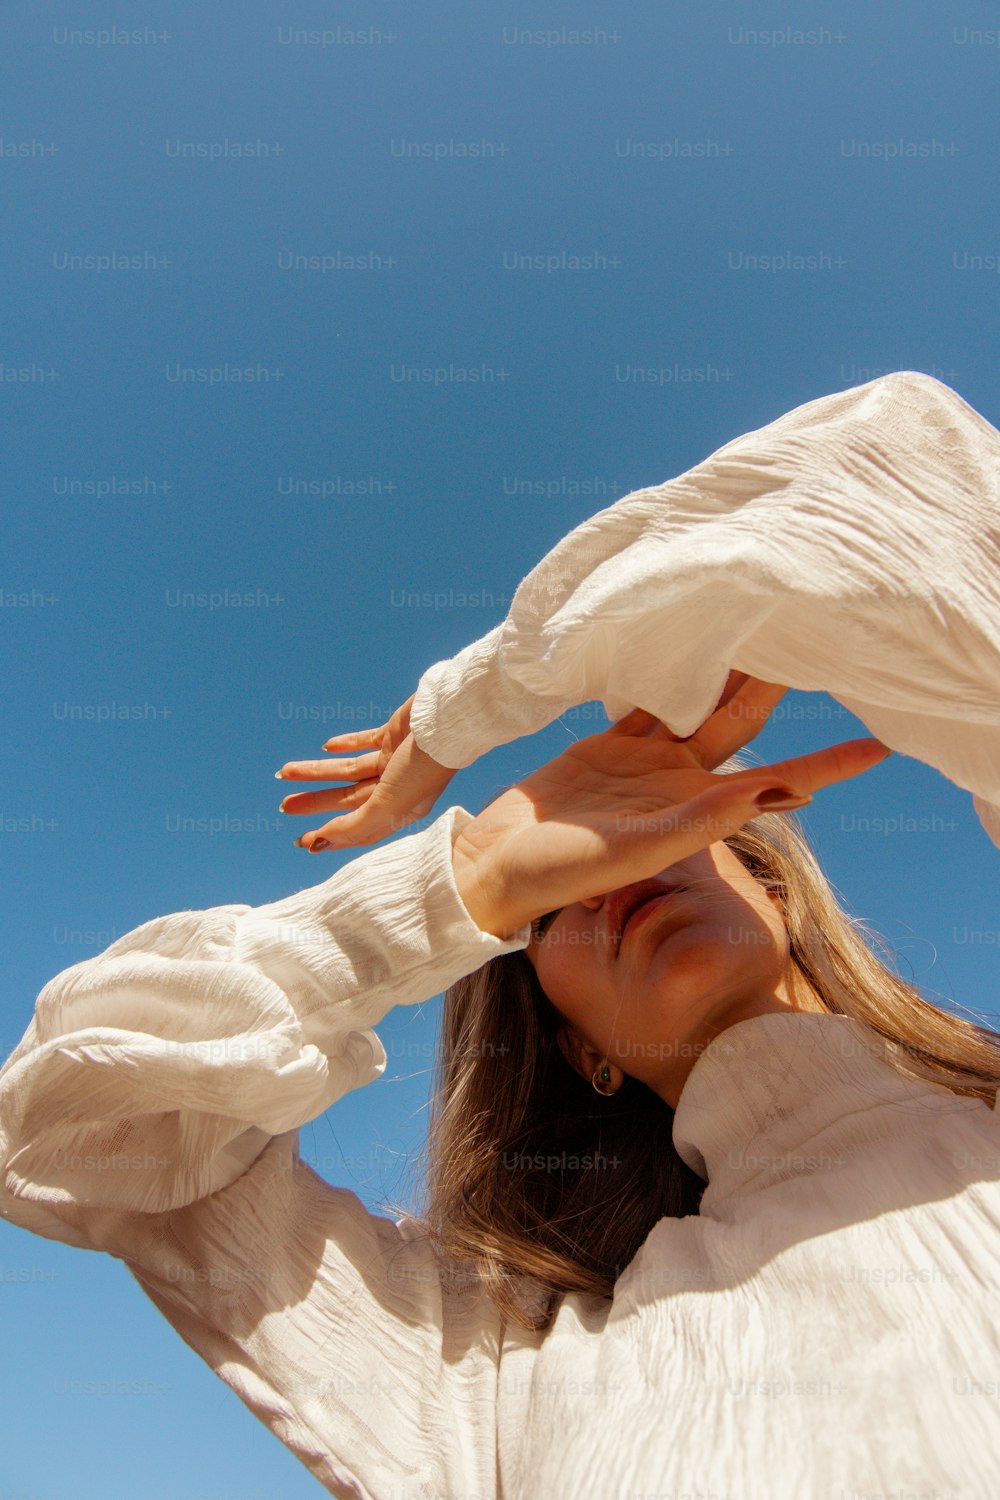 a woman in a white shirt is holding her hands up